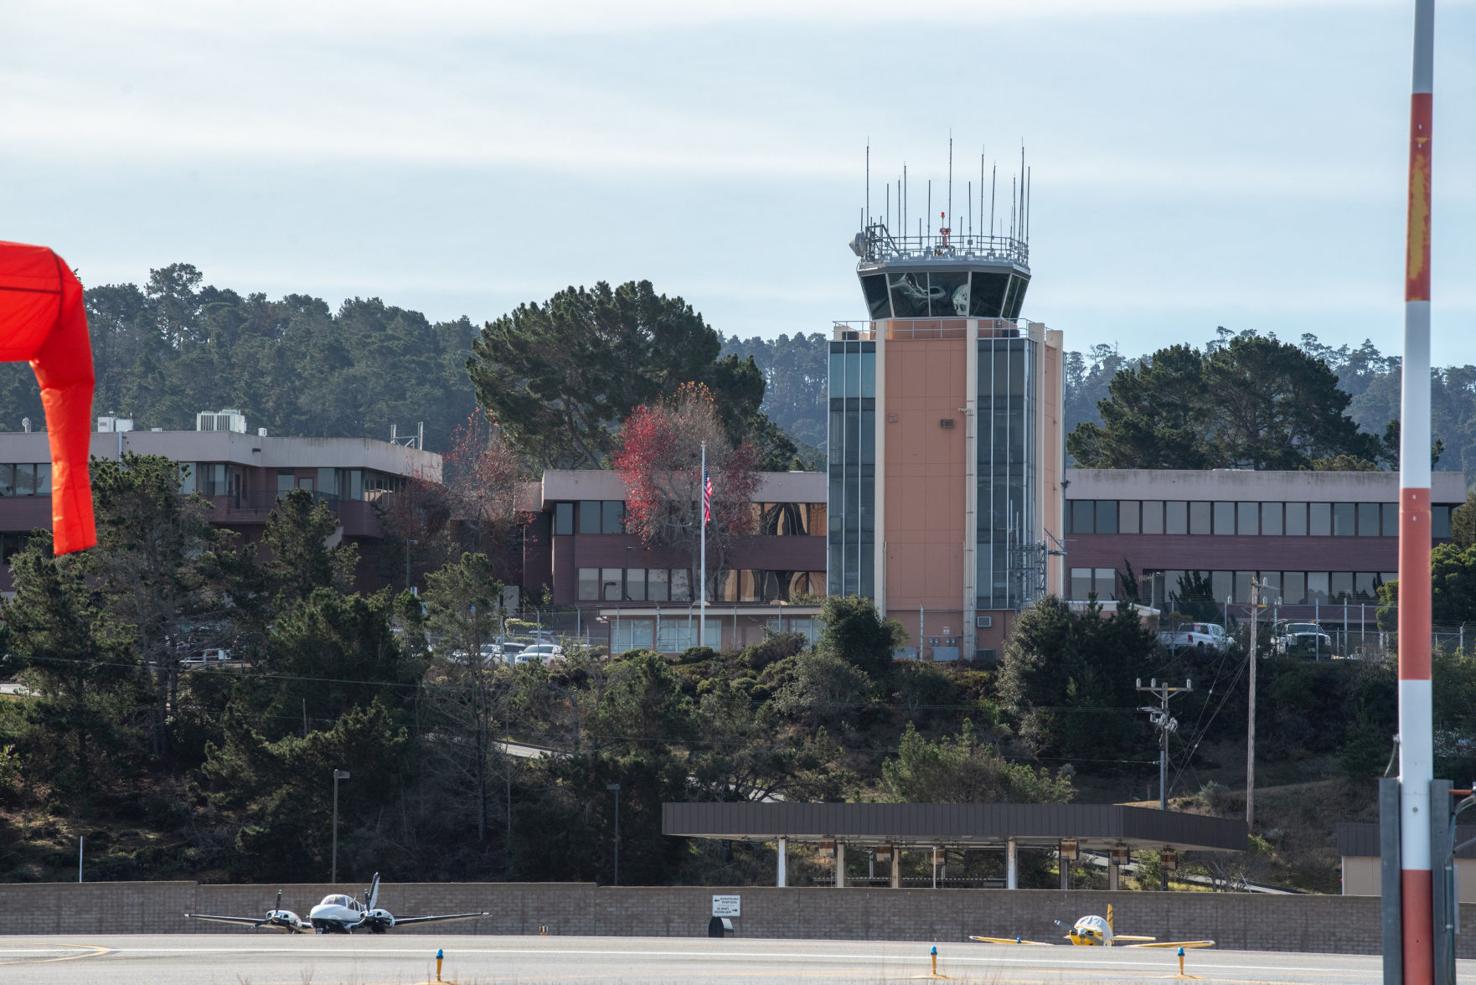 Monterey Regional Airport control tower will operate with reduced hours